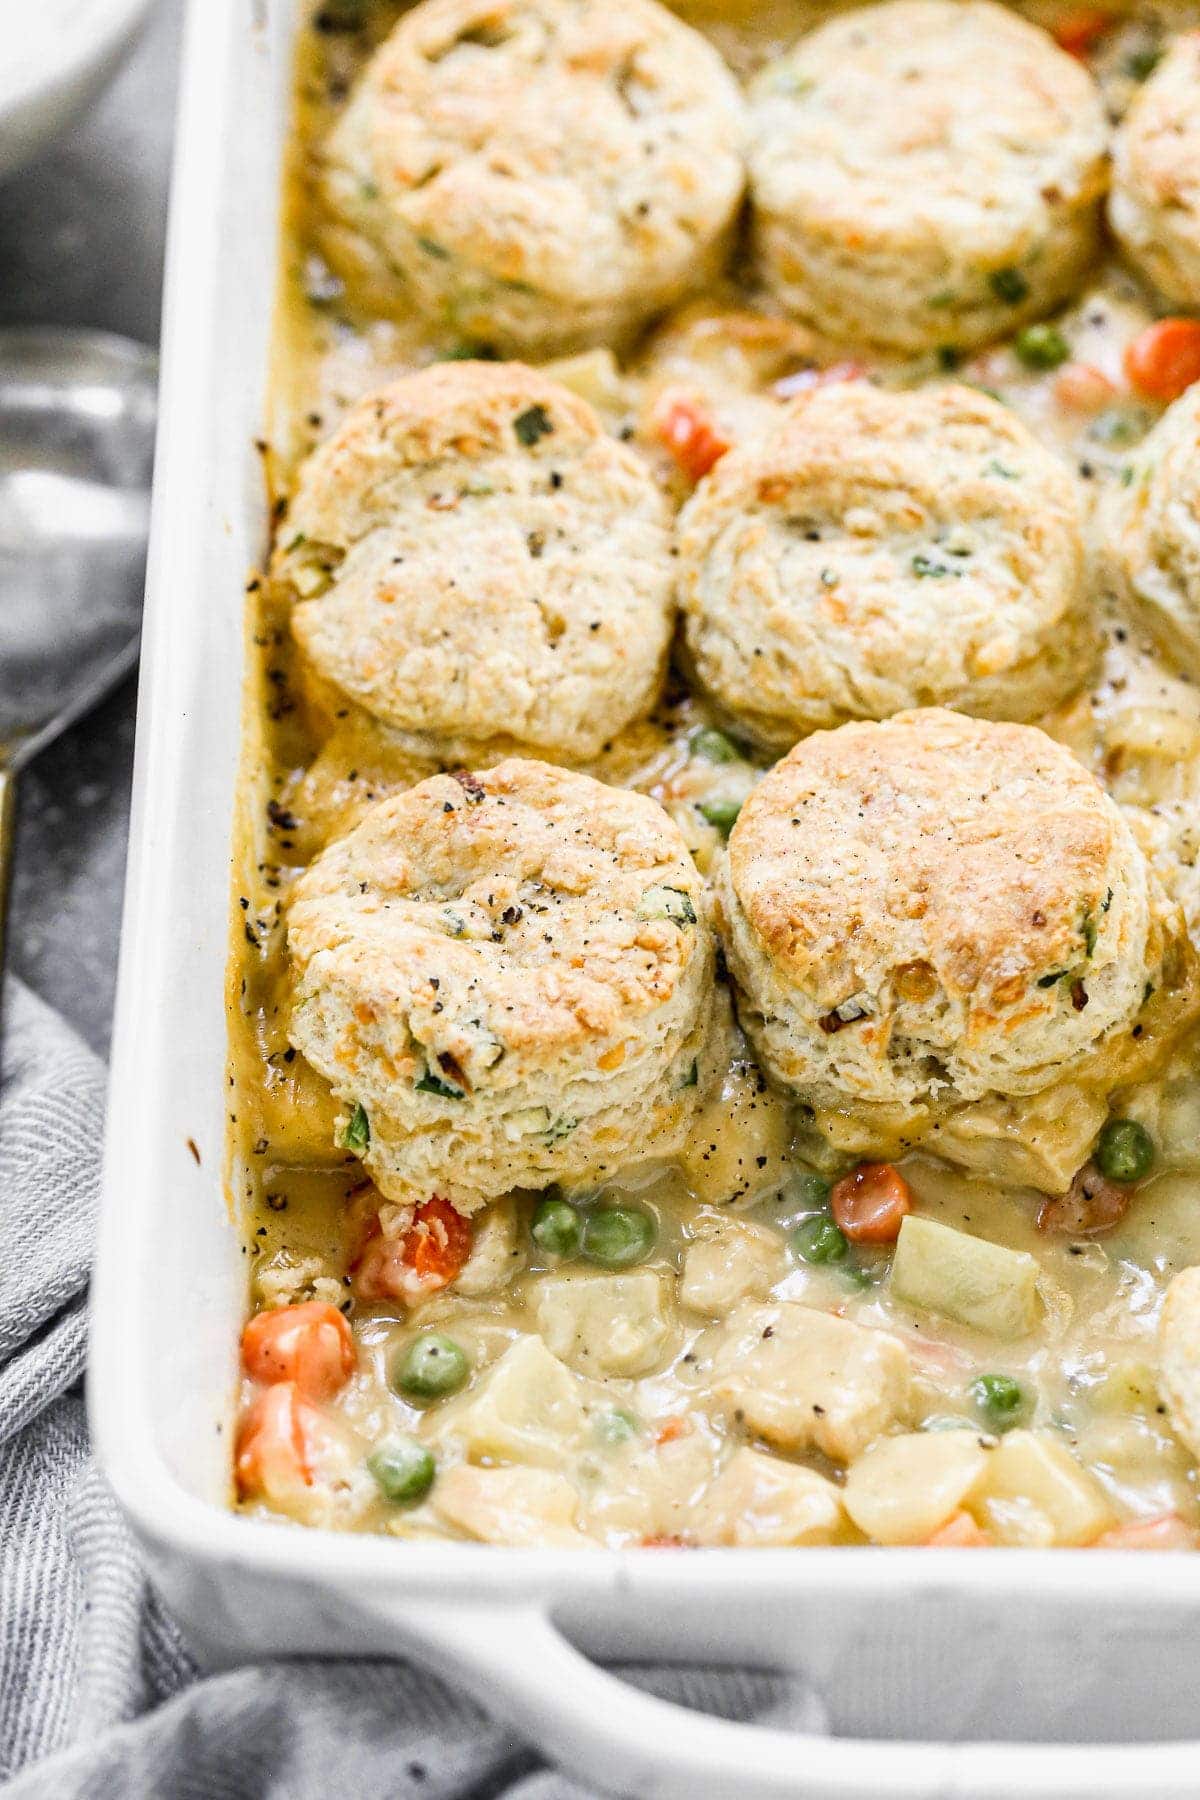 Possibly our&nbsp;favorite comfort food of fall, this&nbsp;Chicken Pot Pie with Biscuits is cozy, delicious and a such fun twist on traditional chicken pot pie. We take a classic creamy pot pie filling full of chicken, carrots, celery, and potatoes and stud it with sharp cheddar cheese and then&nbsp;top it off with fluffy, tender cheddar chive biscuits. Heaven in a casserole dish.